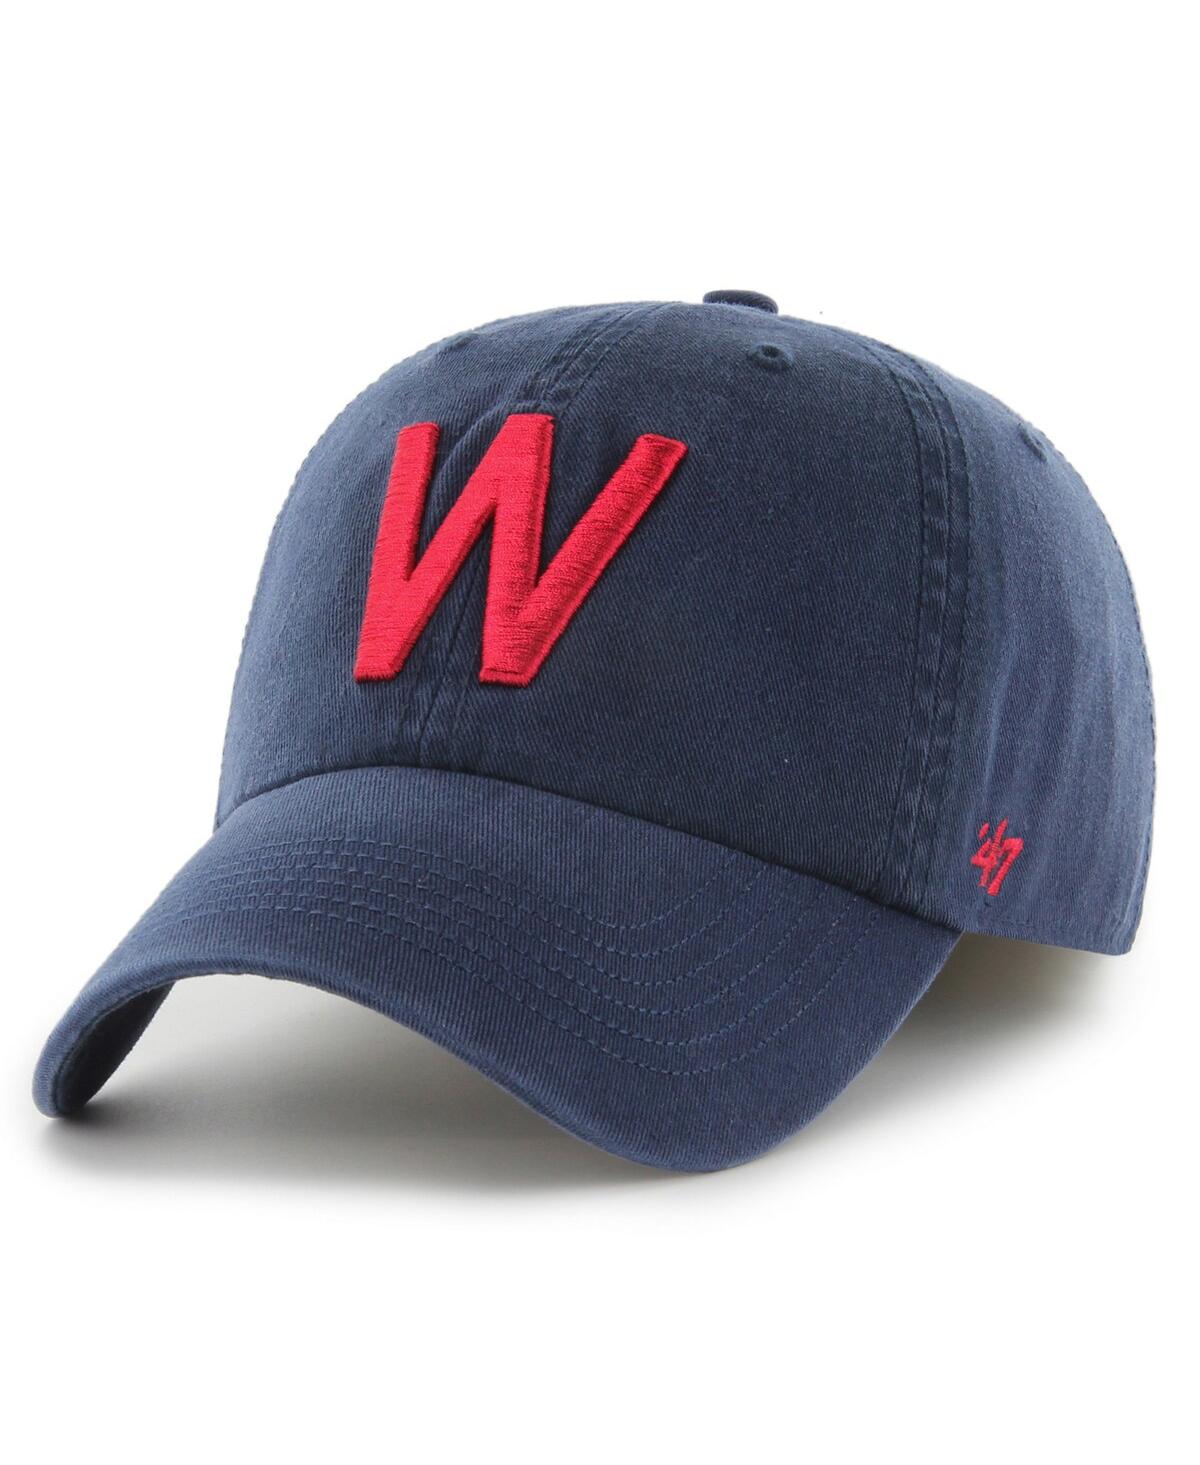 47 Brand Men's ' Navy Washington Senators Cooperstown Collection Franchise Fitted Hat